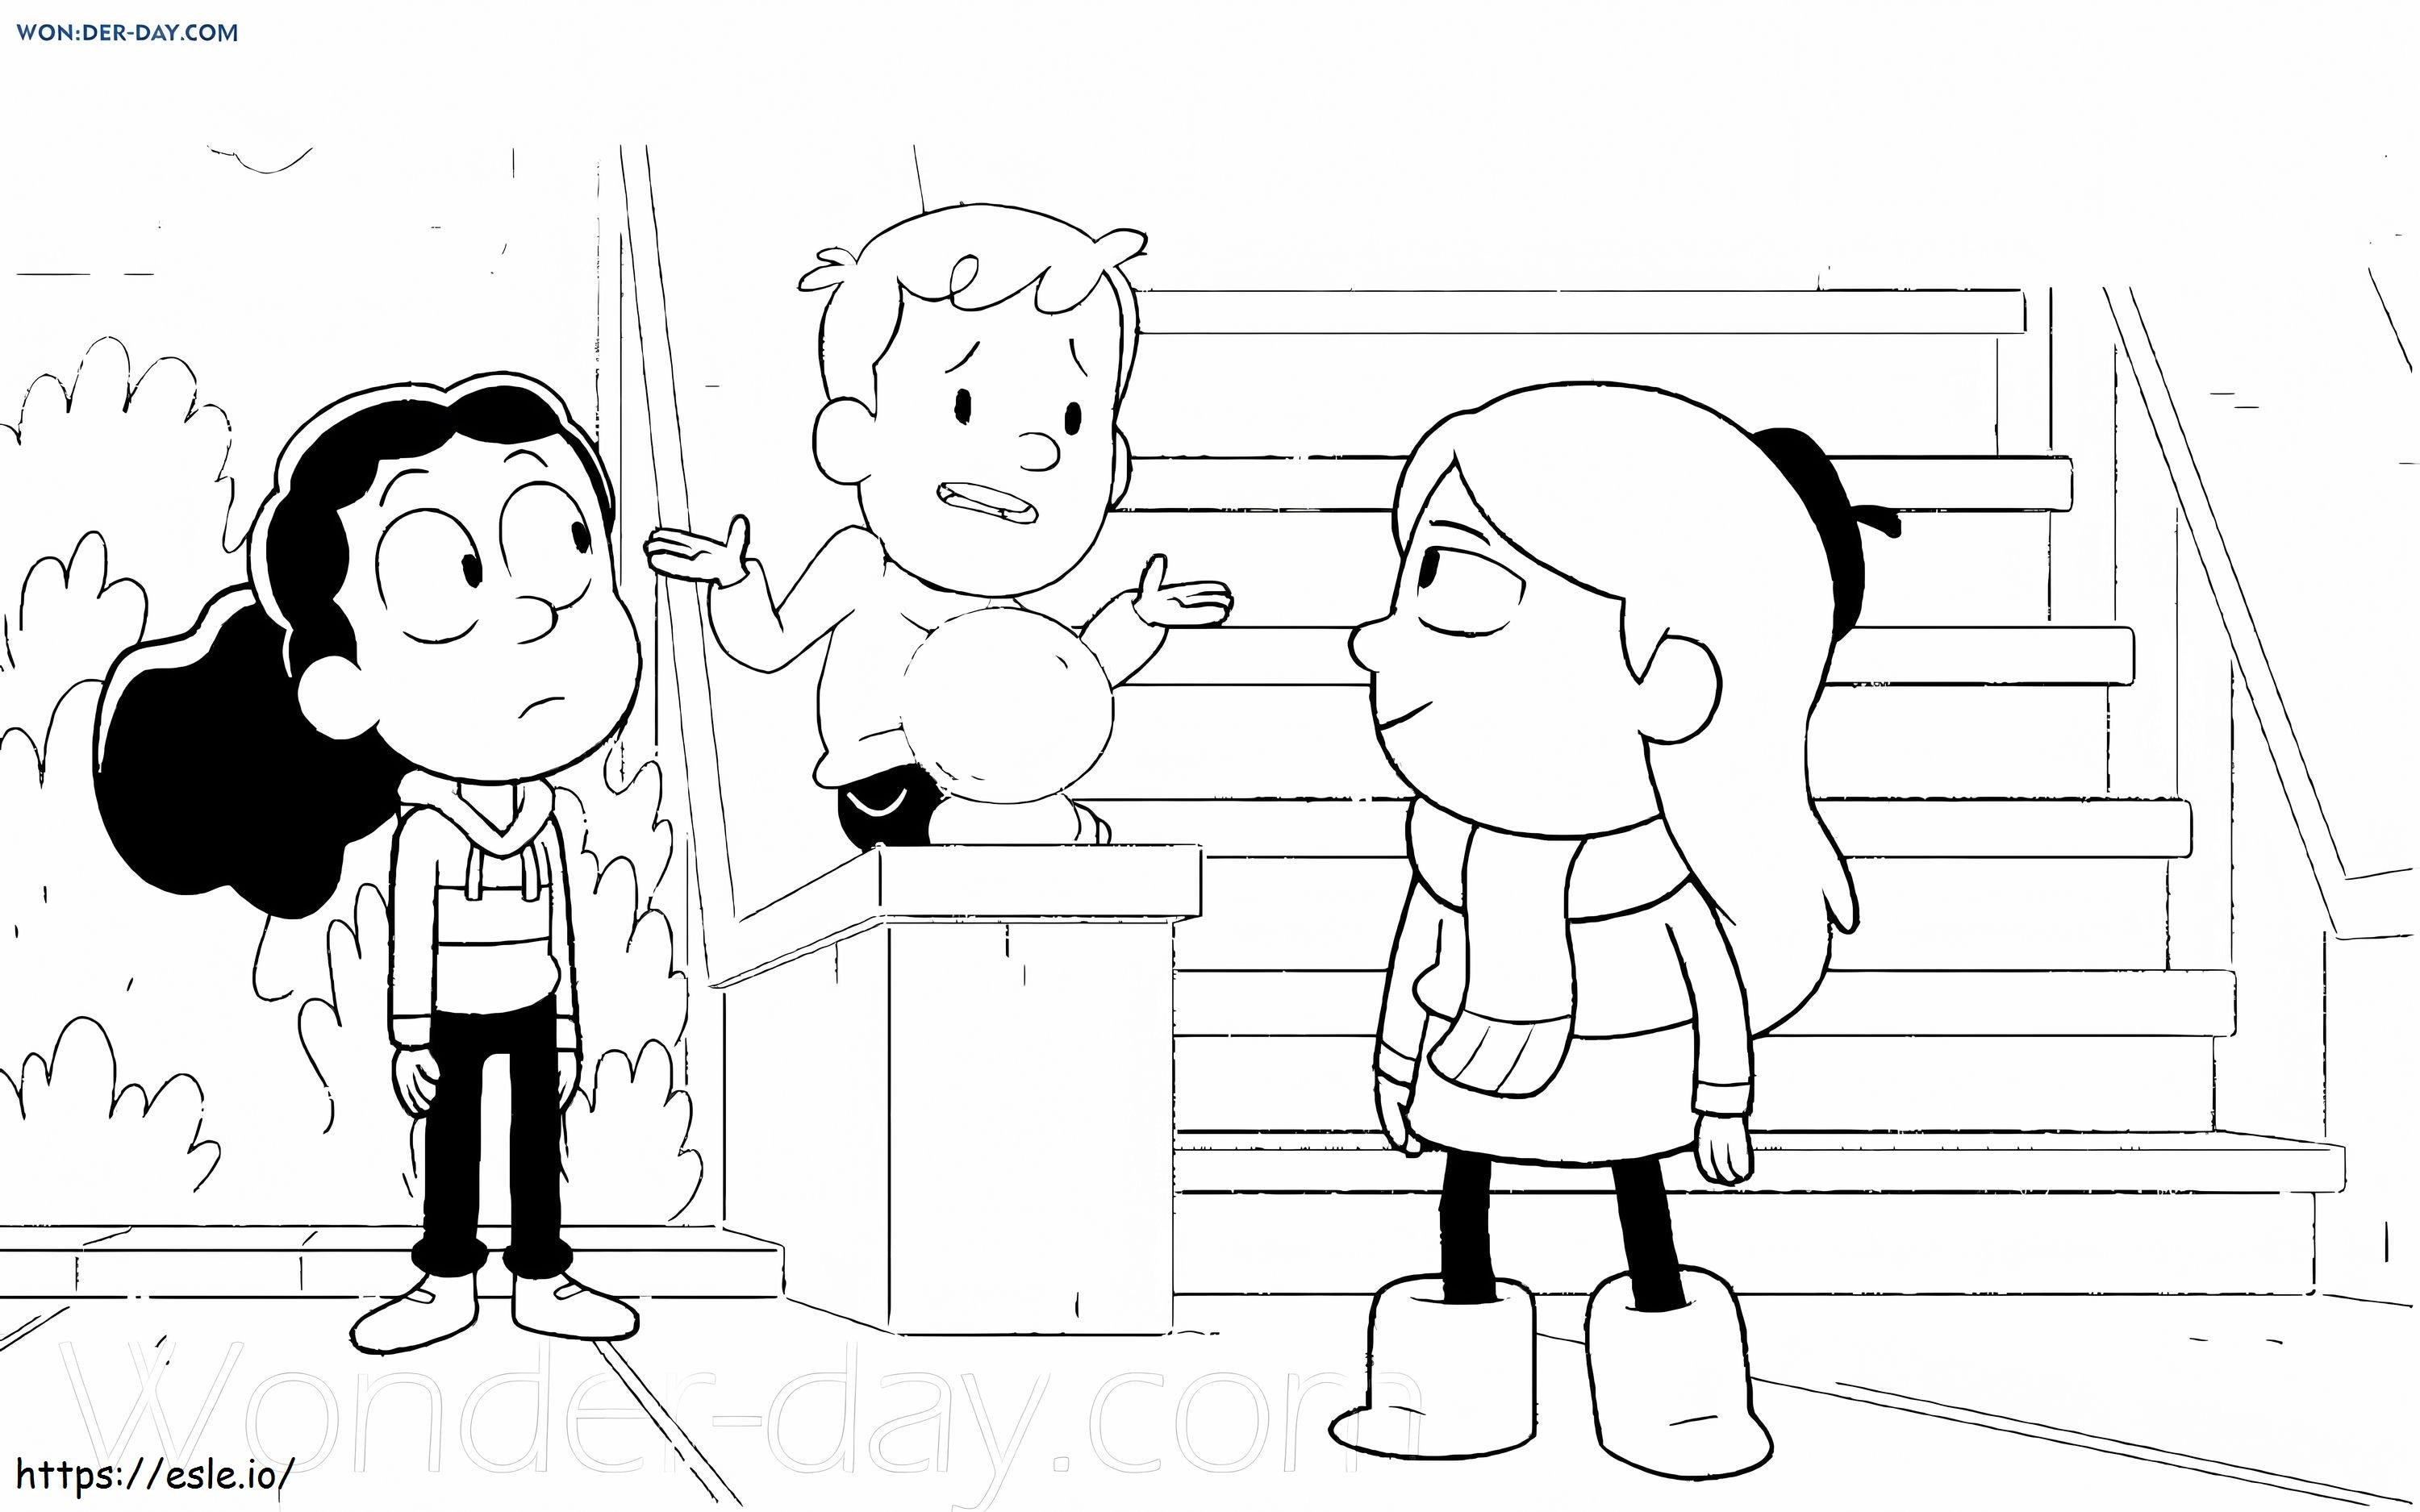 Hilda And Her Friends At Home coloring page